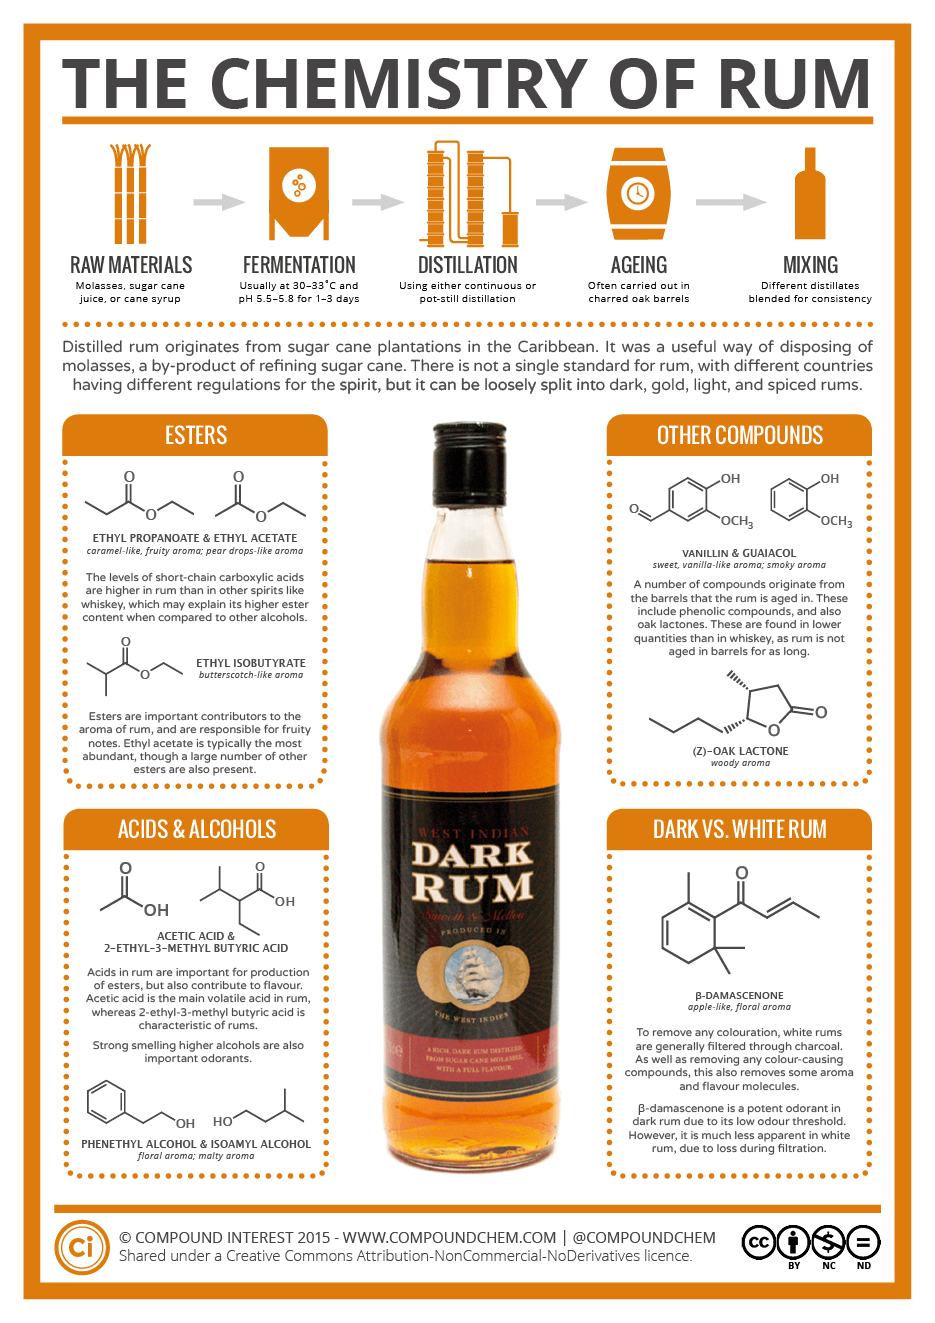 The Chemistry of Rum